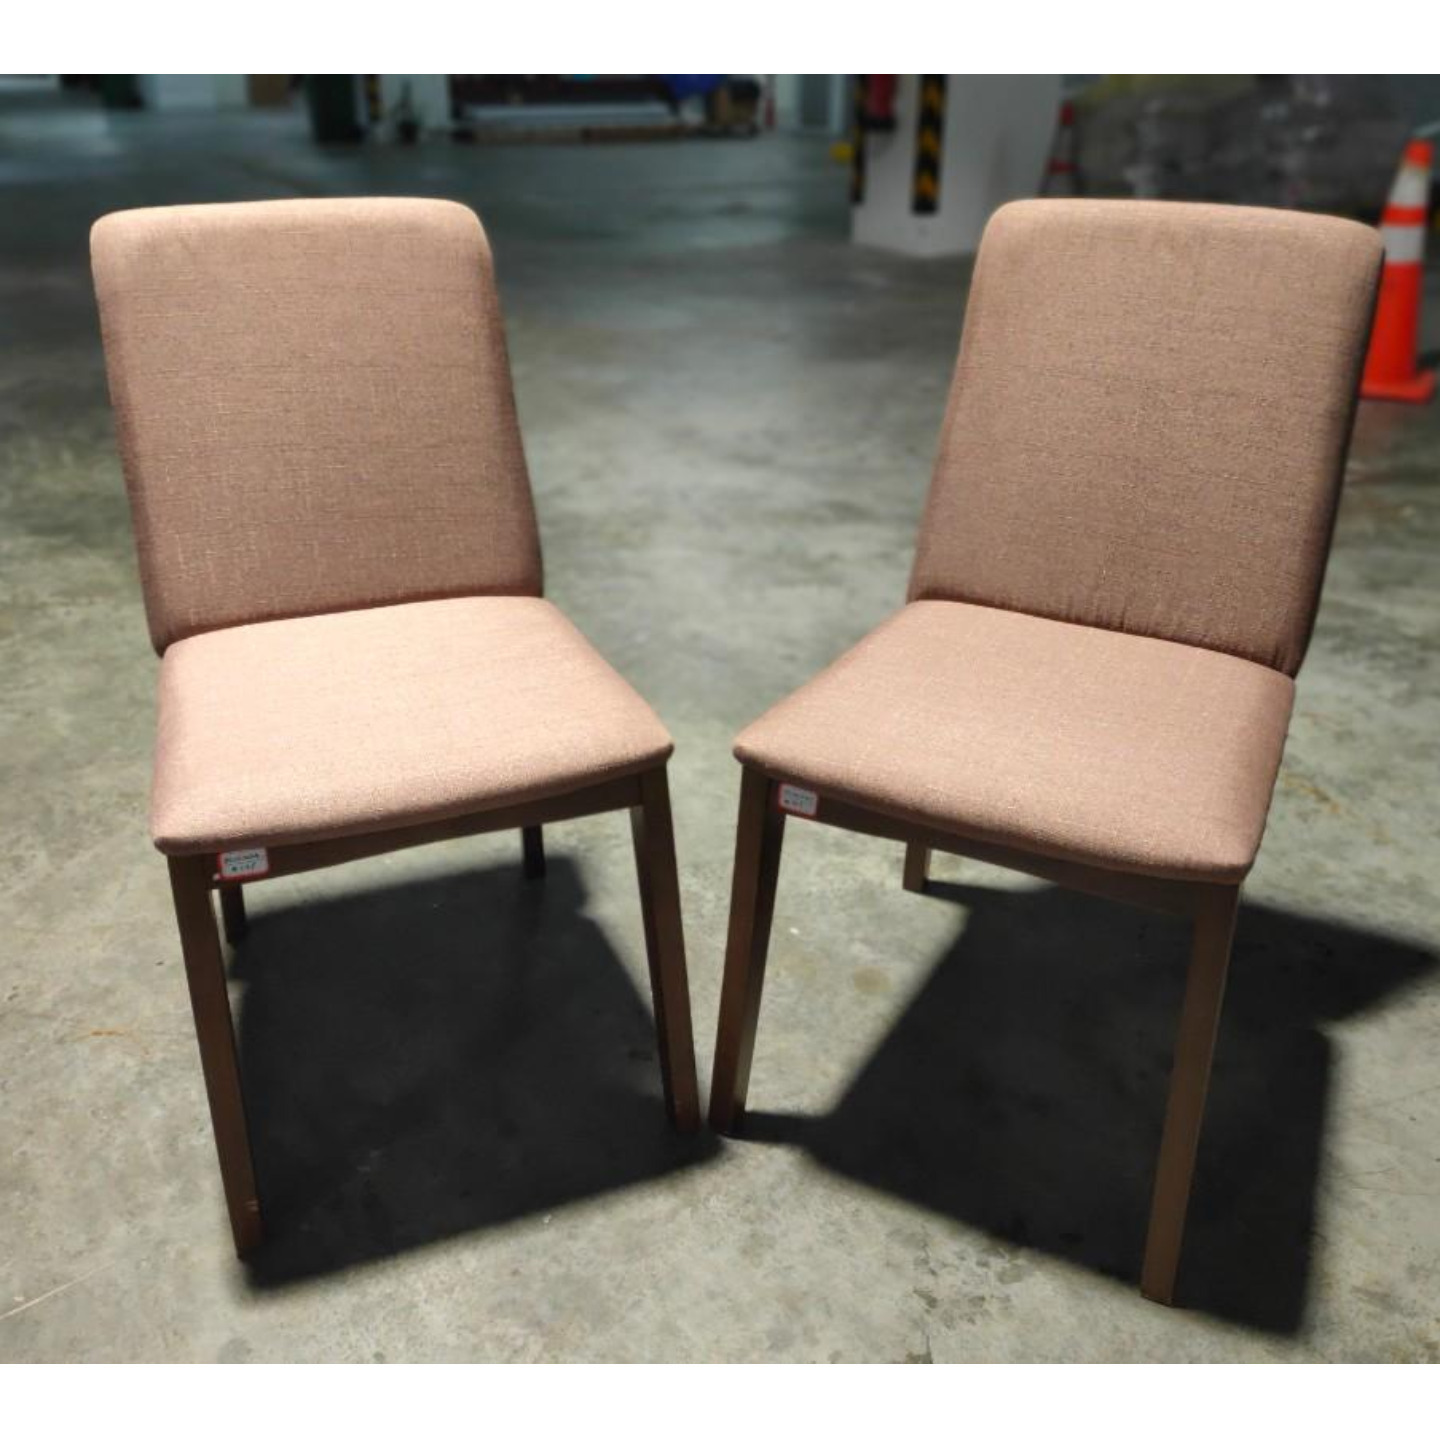 PAIR of BORVEN Vintage Solid Wood Dining Chairs